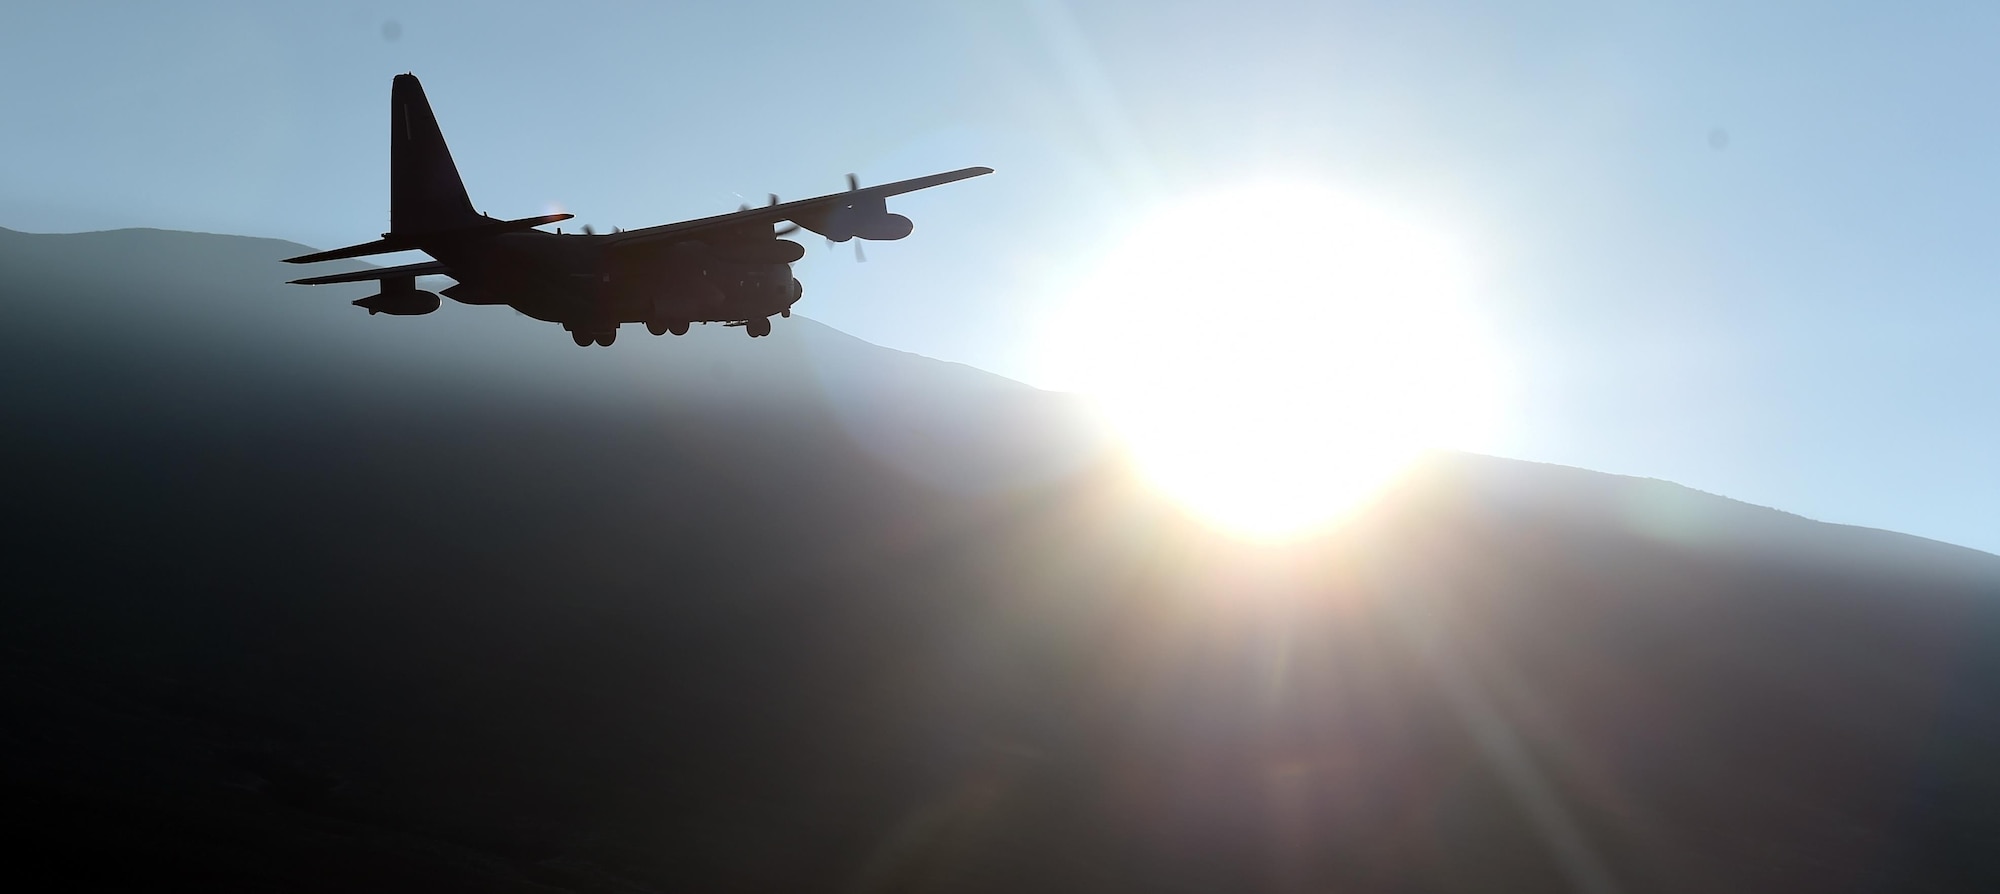 An MC-130J Commando II with the 17th Special Operations Squadron performs a fly by over Pohakuloa Training Area, Hawaii, July 14, 2016. The 353rd SOG led special operations assets and conventional forces from all four branches of the U.S. Armed Forces in a multi-aircraft, joint airborne operation as part of Rim of the Pacific (RIMPAC) 2016 to strengthen their relationships and interoperability with their partners. (U.S. Air Force photo by 2nd Lt. Jaclyn Pienkowski/Released)